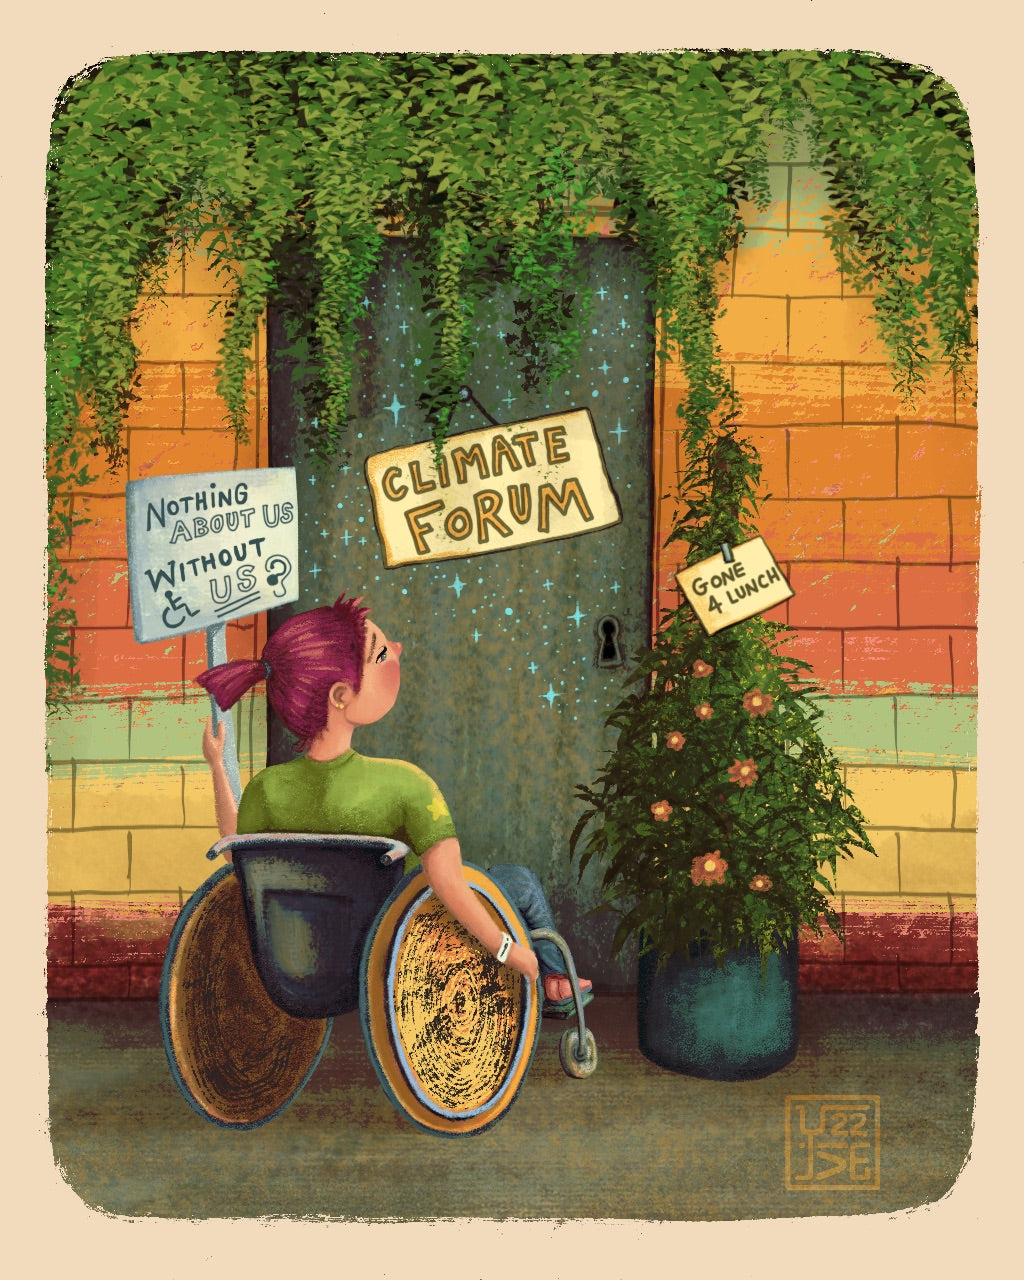 Illustration: A person with burgundy colored hair, wearing a green top and blue pants is sitting on a wheelchair, holding a white color board with blue text that says, “Nothing about us, without us” in all caps. There are symbols of a wheelchair user and an ear with a hearing aid on it. The person is facing a closed door that is greyish blue in color and has the twinkling stars in light blue. The door has a pale-yellow board hung on it that says “climate forum” in all caps, with text yellow in color. The wall around the door has bricks that are orange in color, followed by pastel green, yellow and brown colors. There is a blanket of green leaves that hangs from the top of the wall. A blue pot with an orange flowering plant sits beside the door and has a note in yellow with the text, “gone 4 lunch” in black and all caps. The ground is grey in color. The person on the wheelchair looks dejected at not being able to attend the climate forum.